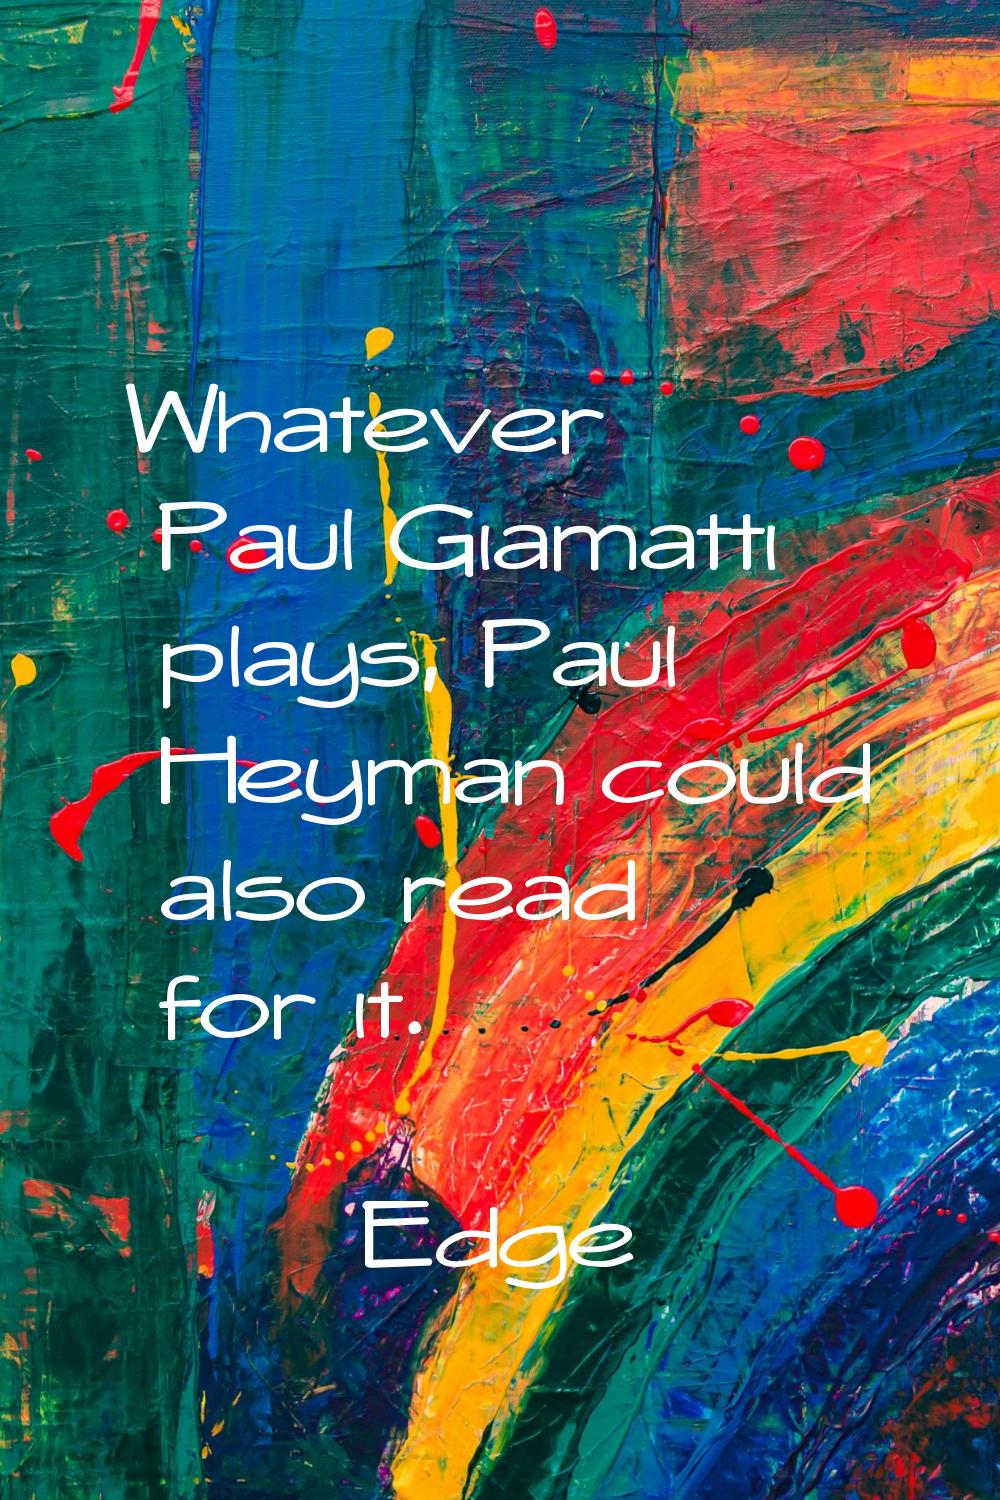 Whatever Paul Giamatti plays, Paul Heyman could also read for it.